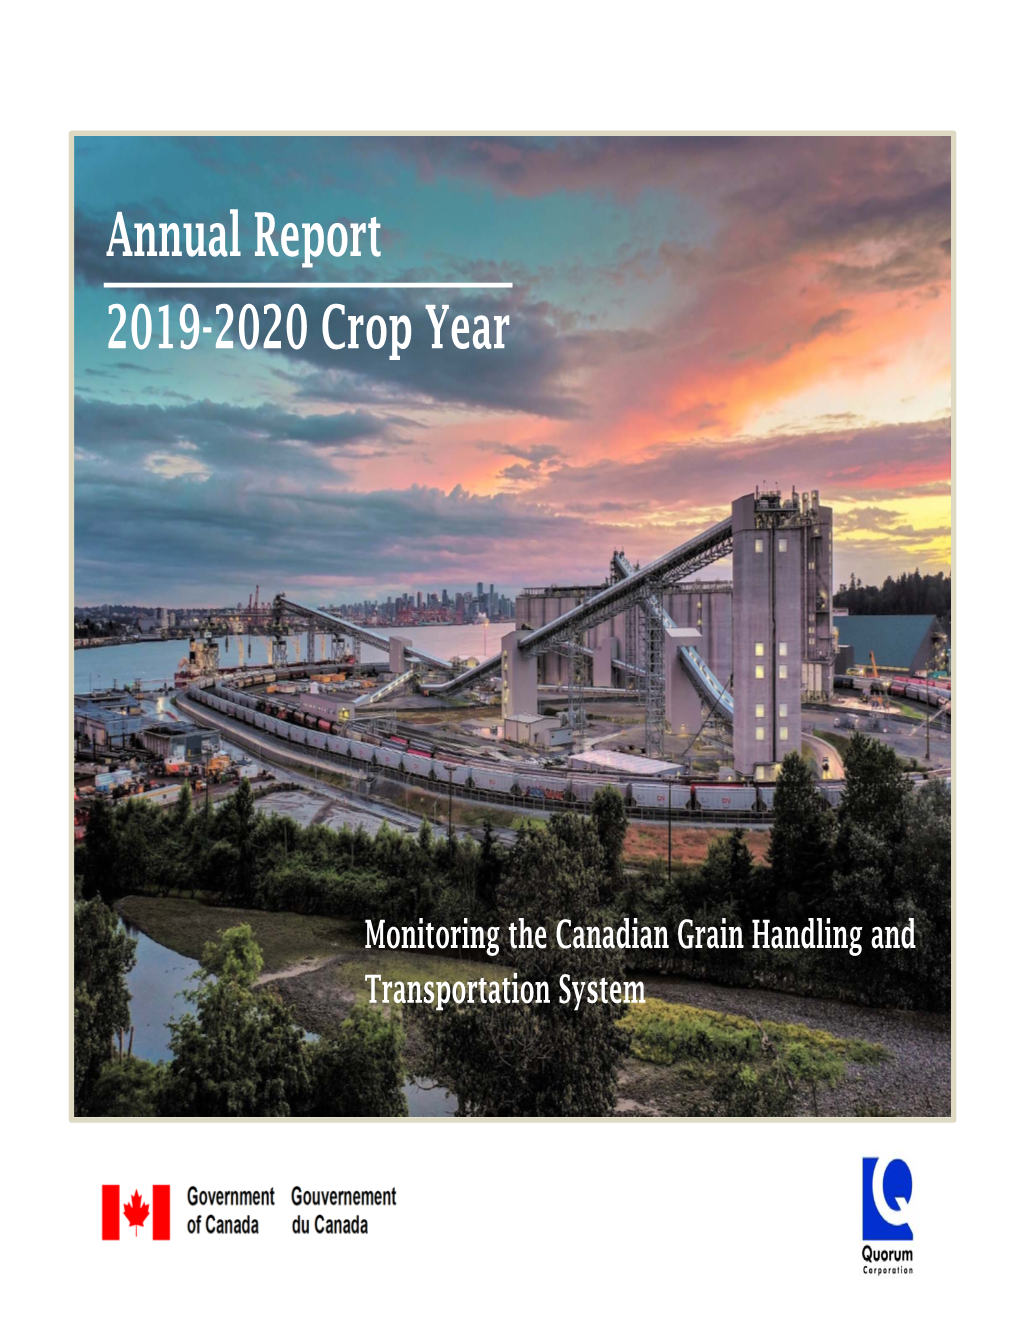 Annual Report 2019-2020 Crop Year